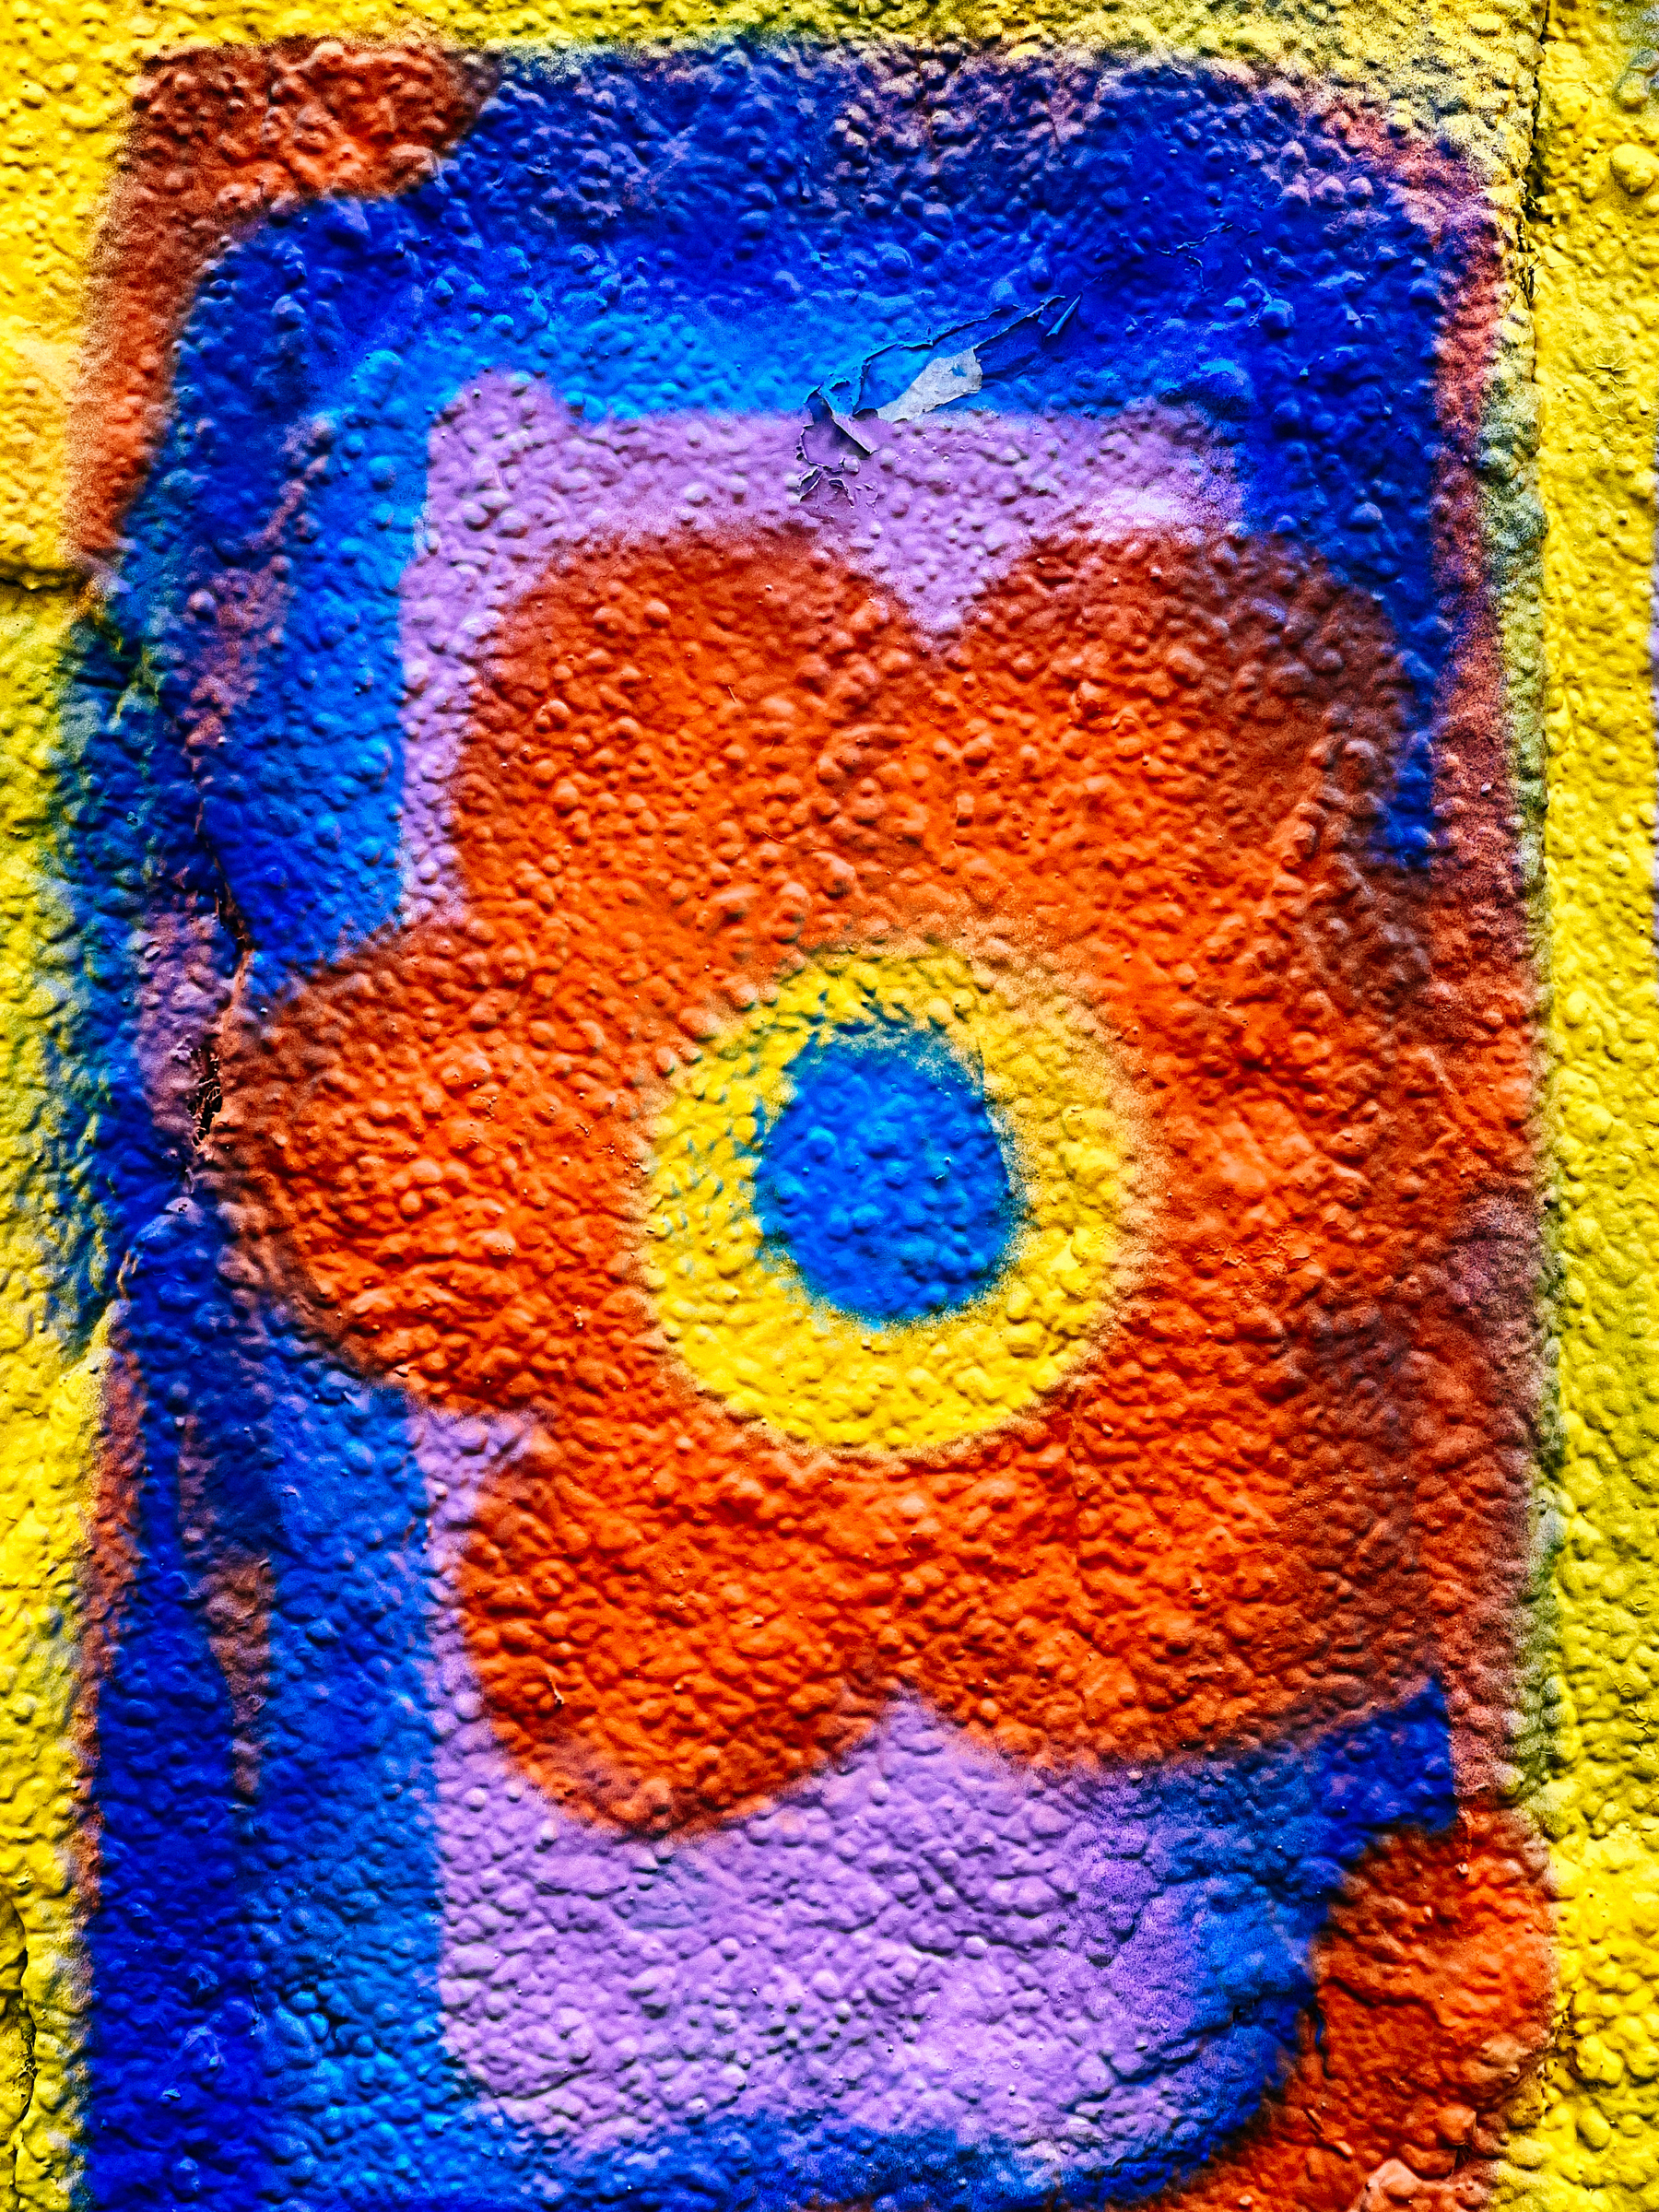 Graffiti of a colorful abstract flower with a blue center, orange petals, and a purple outline on a textured wall with yellow and blue background.